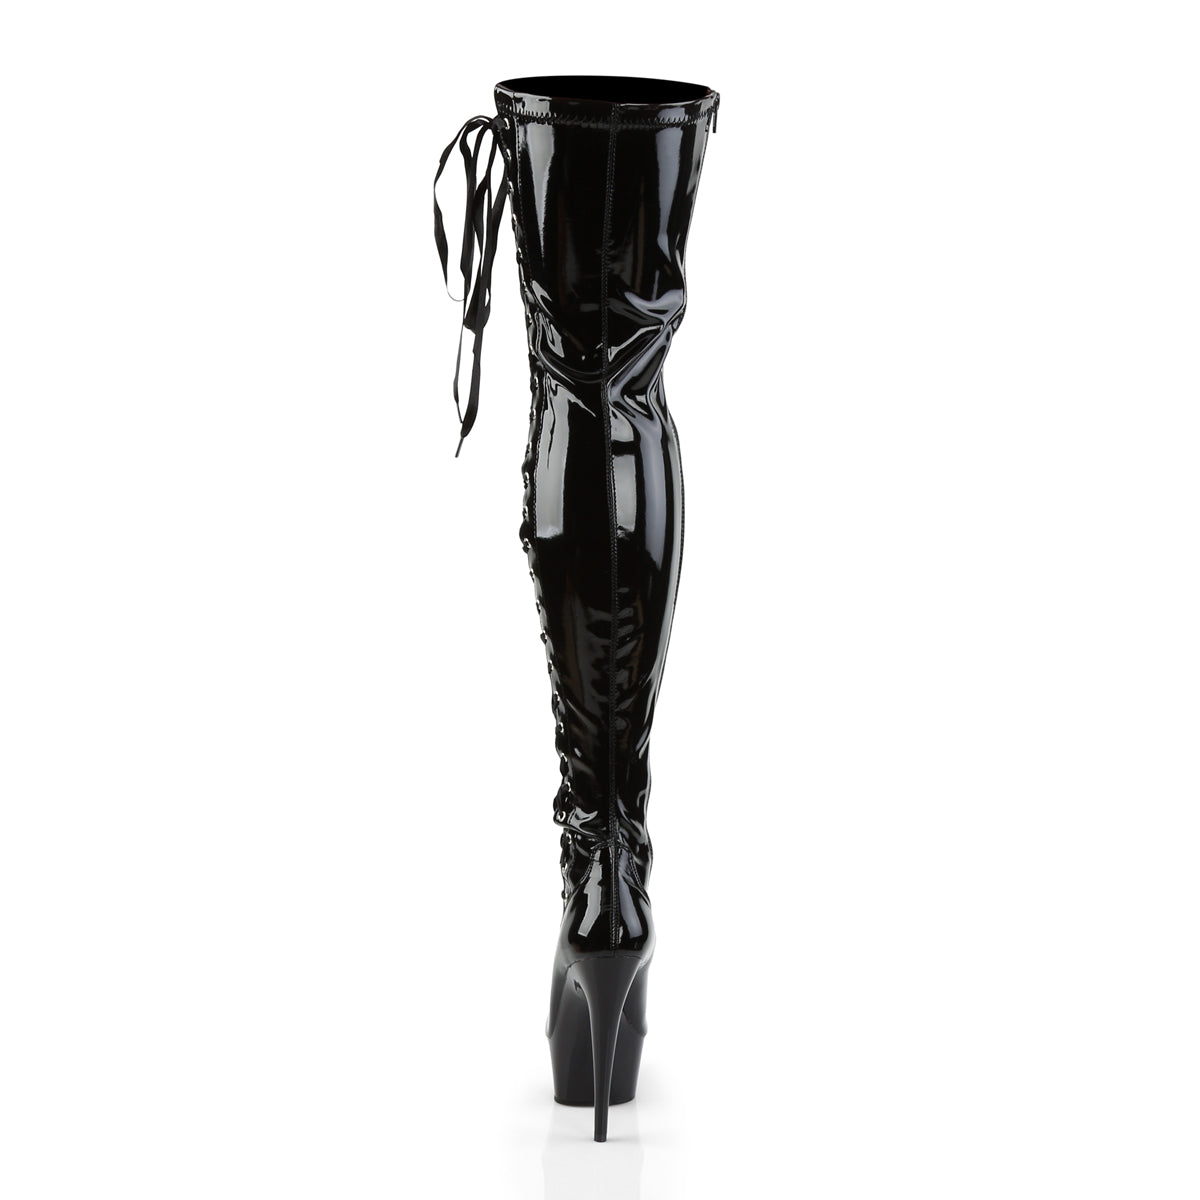 DELIGHT-3050 6" Heel Black Stretch Patent Pole Dancer Boots-Pleaser- Sexy Shoes Fetish Footwear